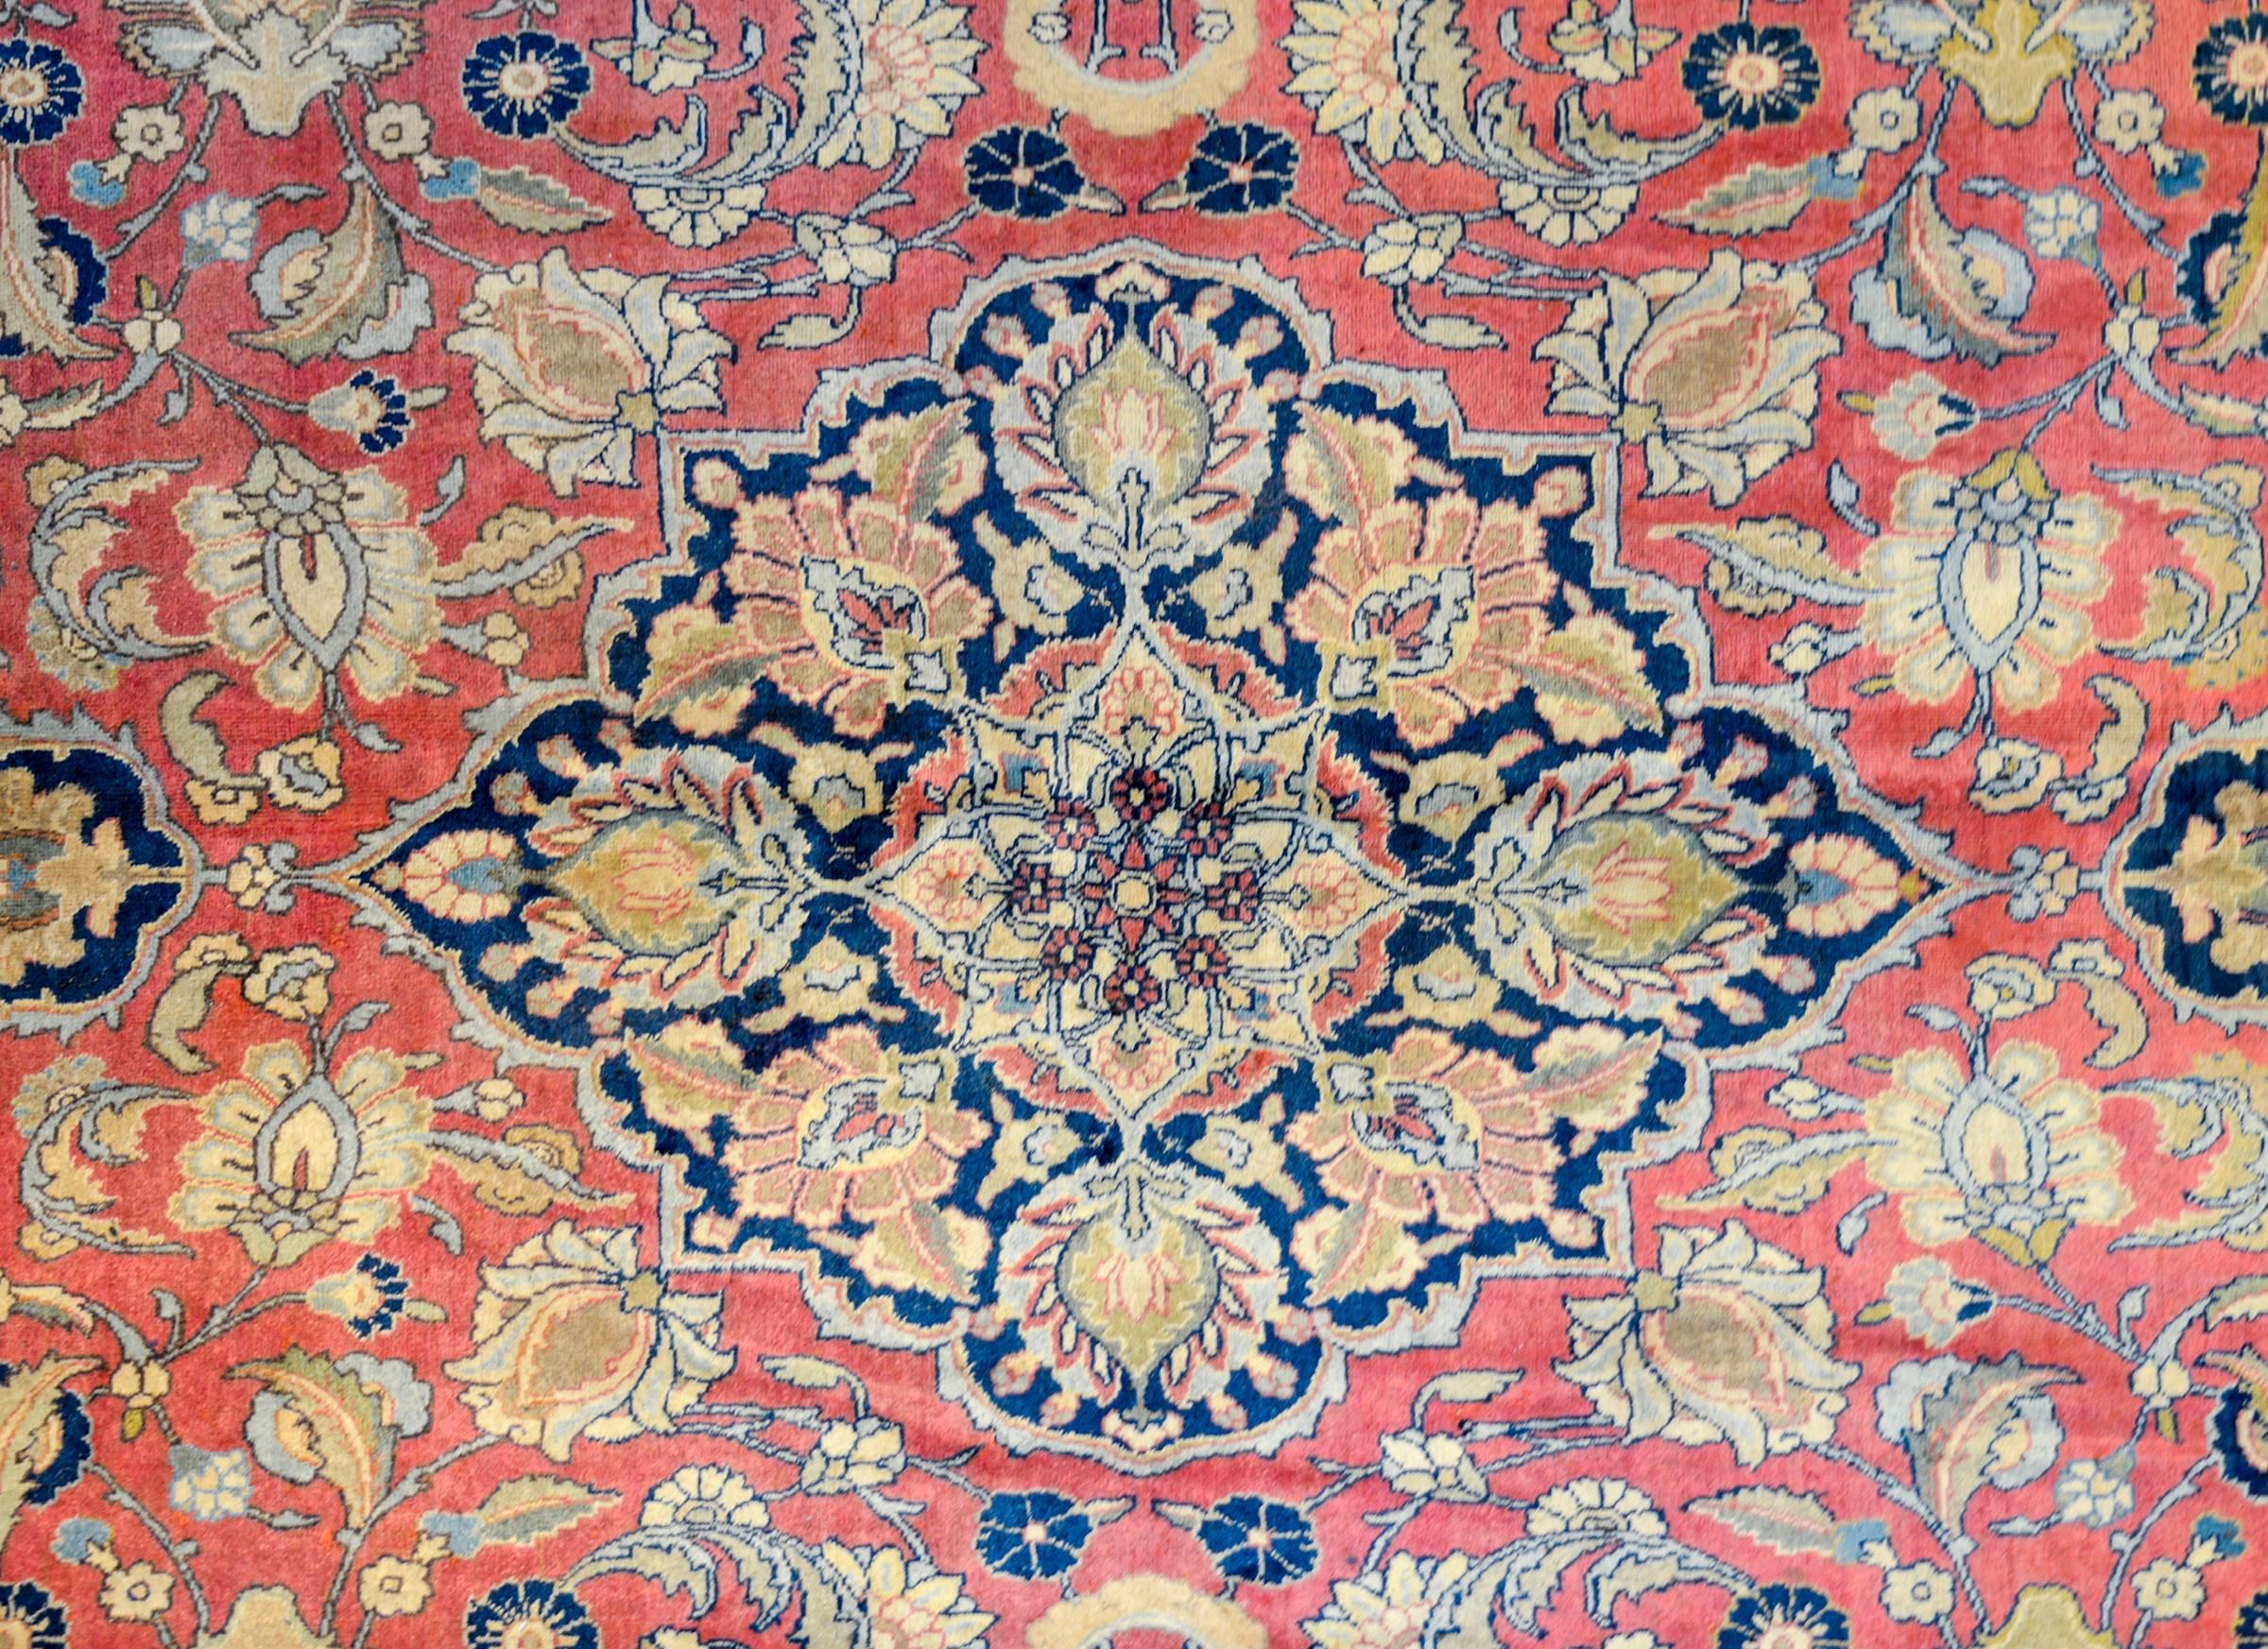 An incredible mid-20th century Persian Tabriz rug with a fantastic pattern of intricately and tightly woven pattern containing a large central medallion amidst a field of flowers and scrolling vines all woven in gold, pink, green, and light and dark